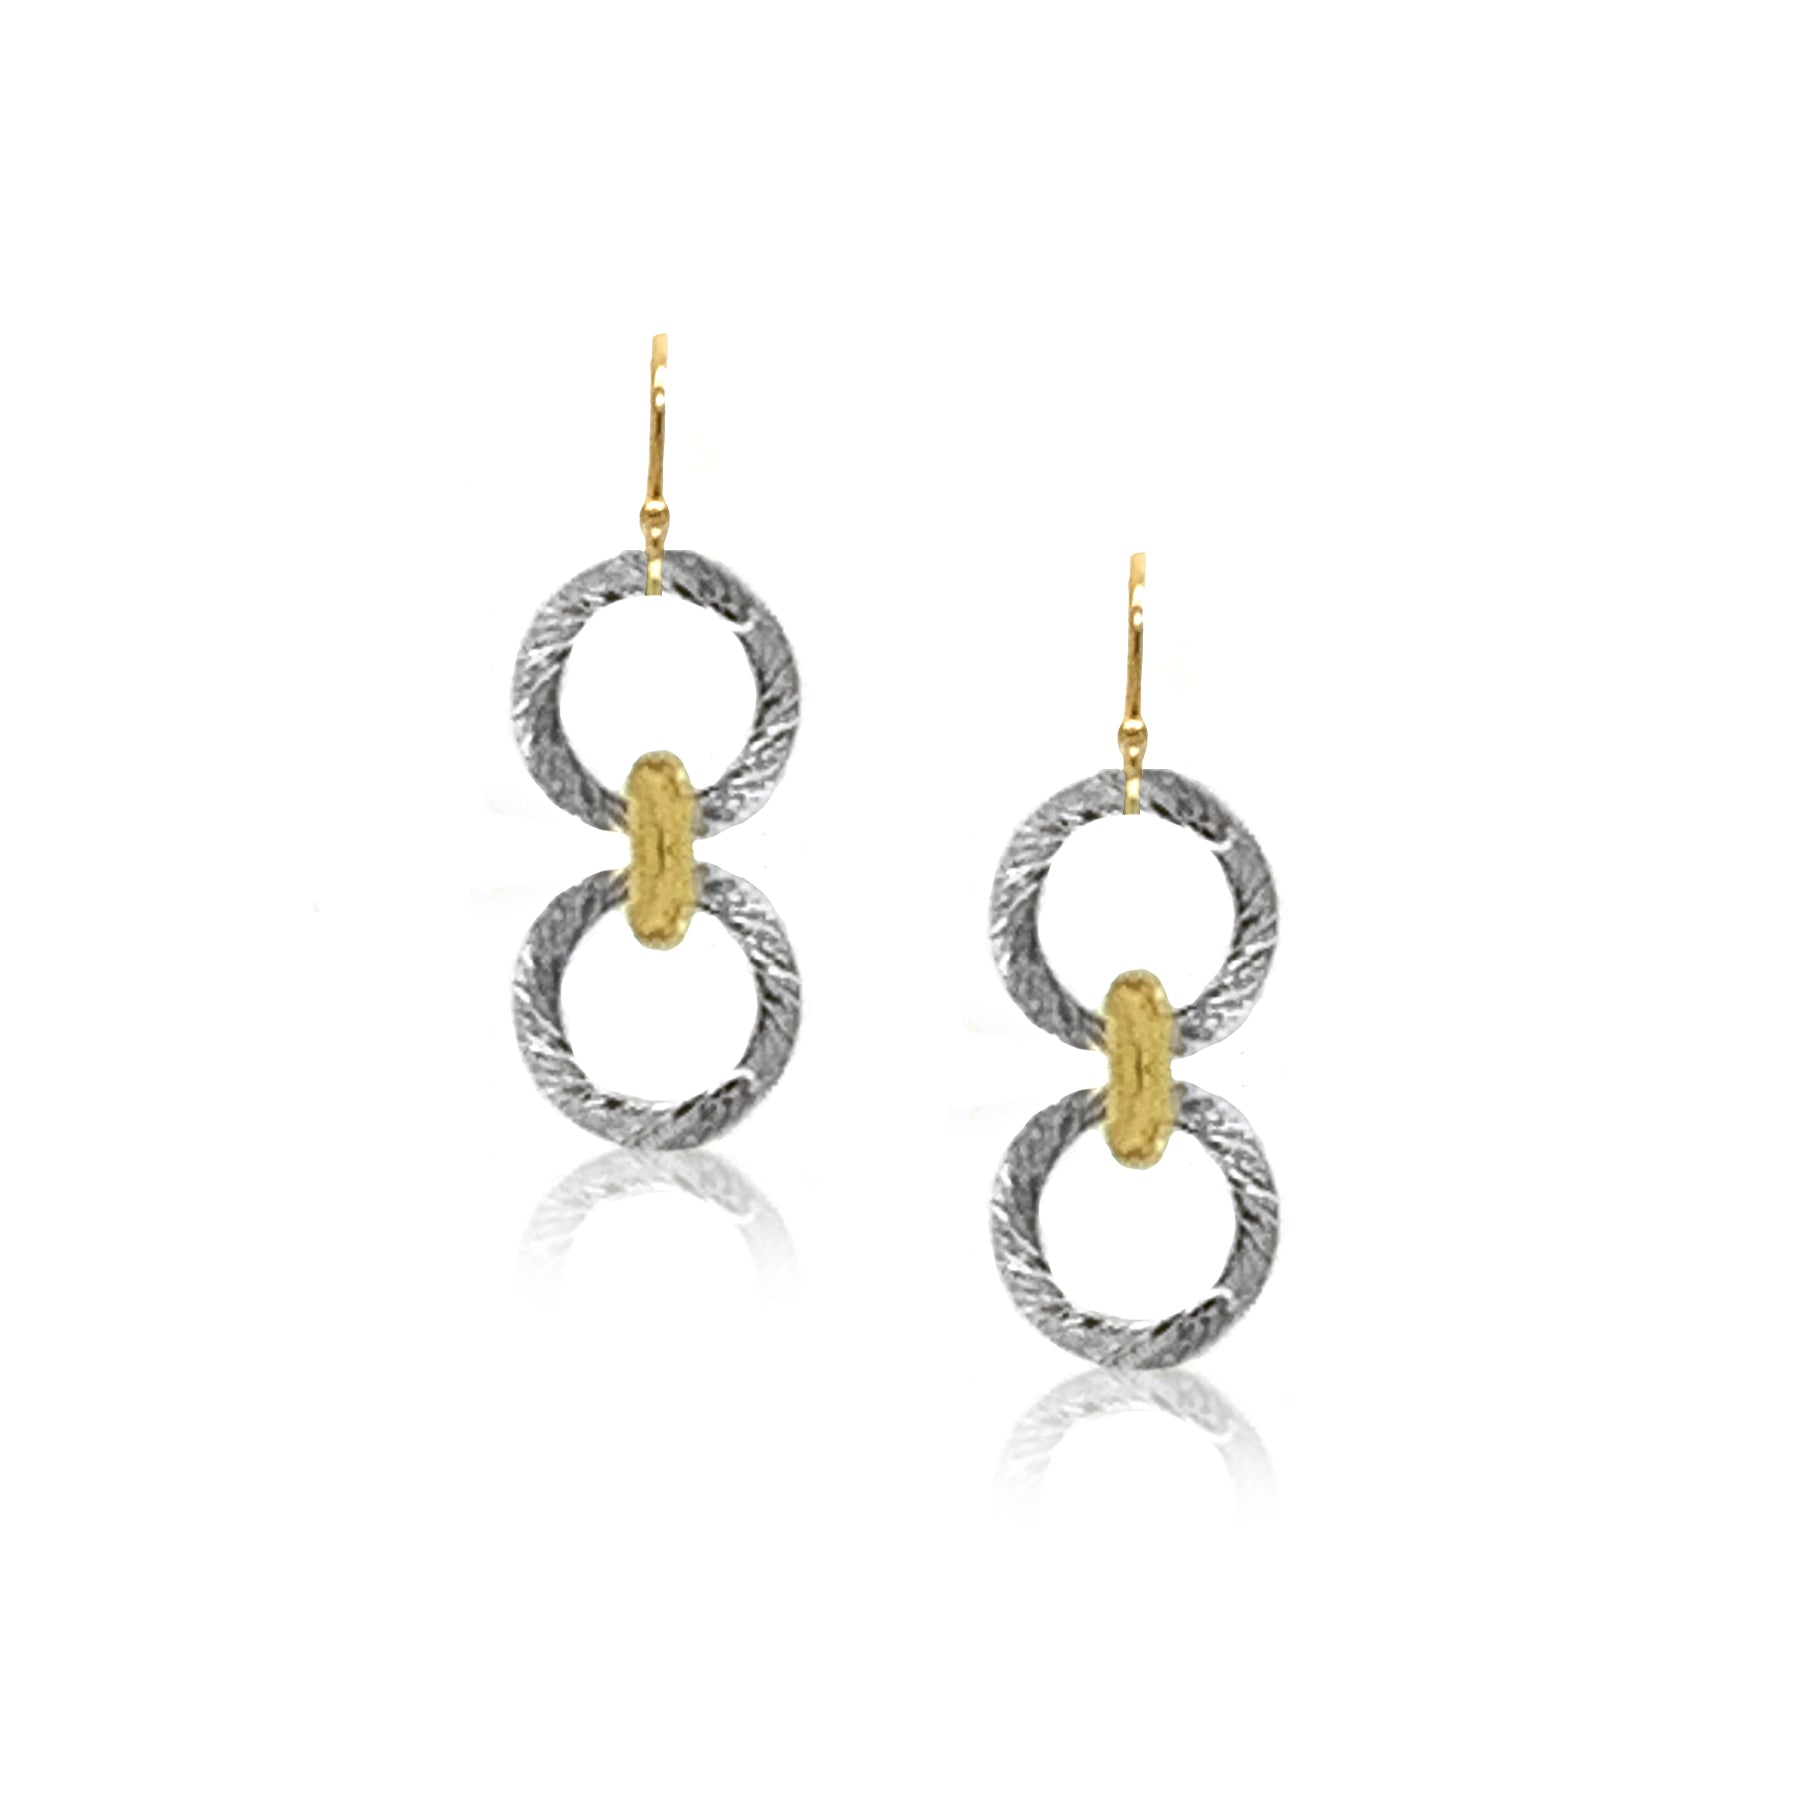 Small Connection Earring- Silver/Gold